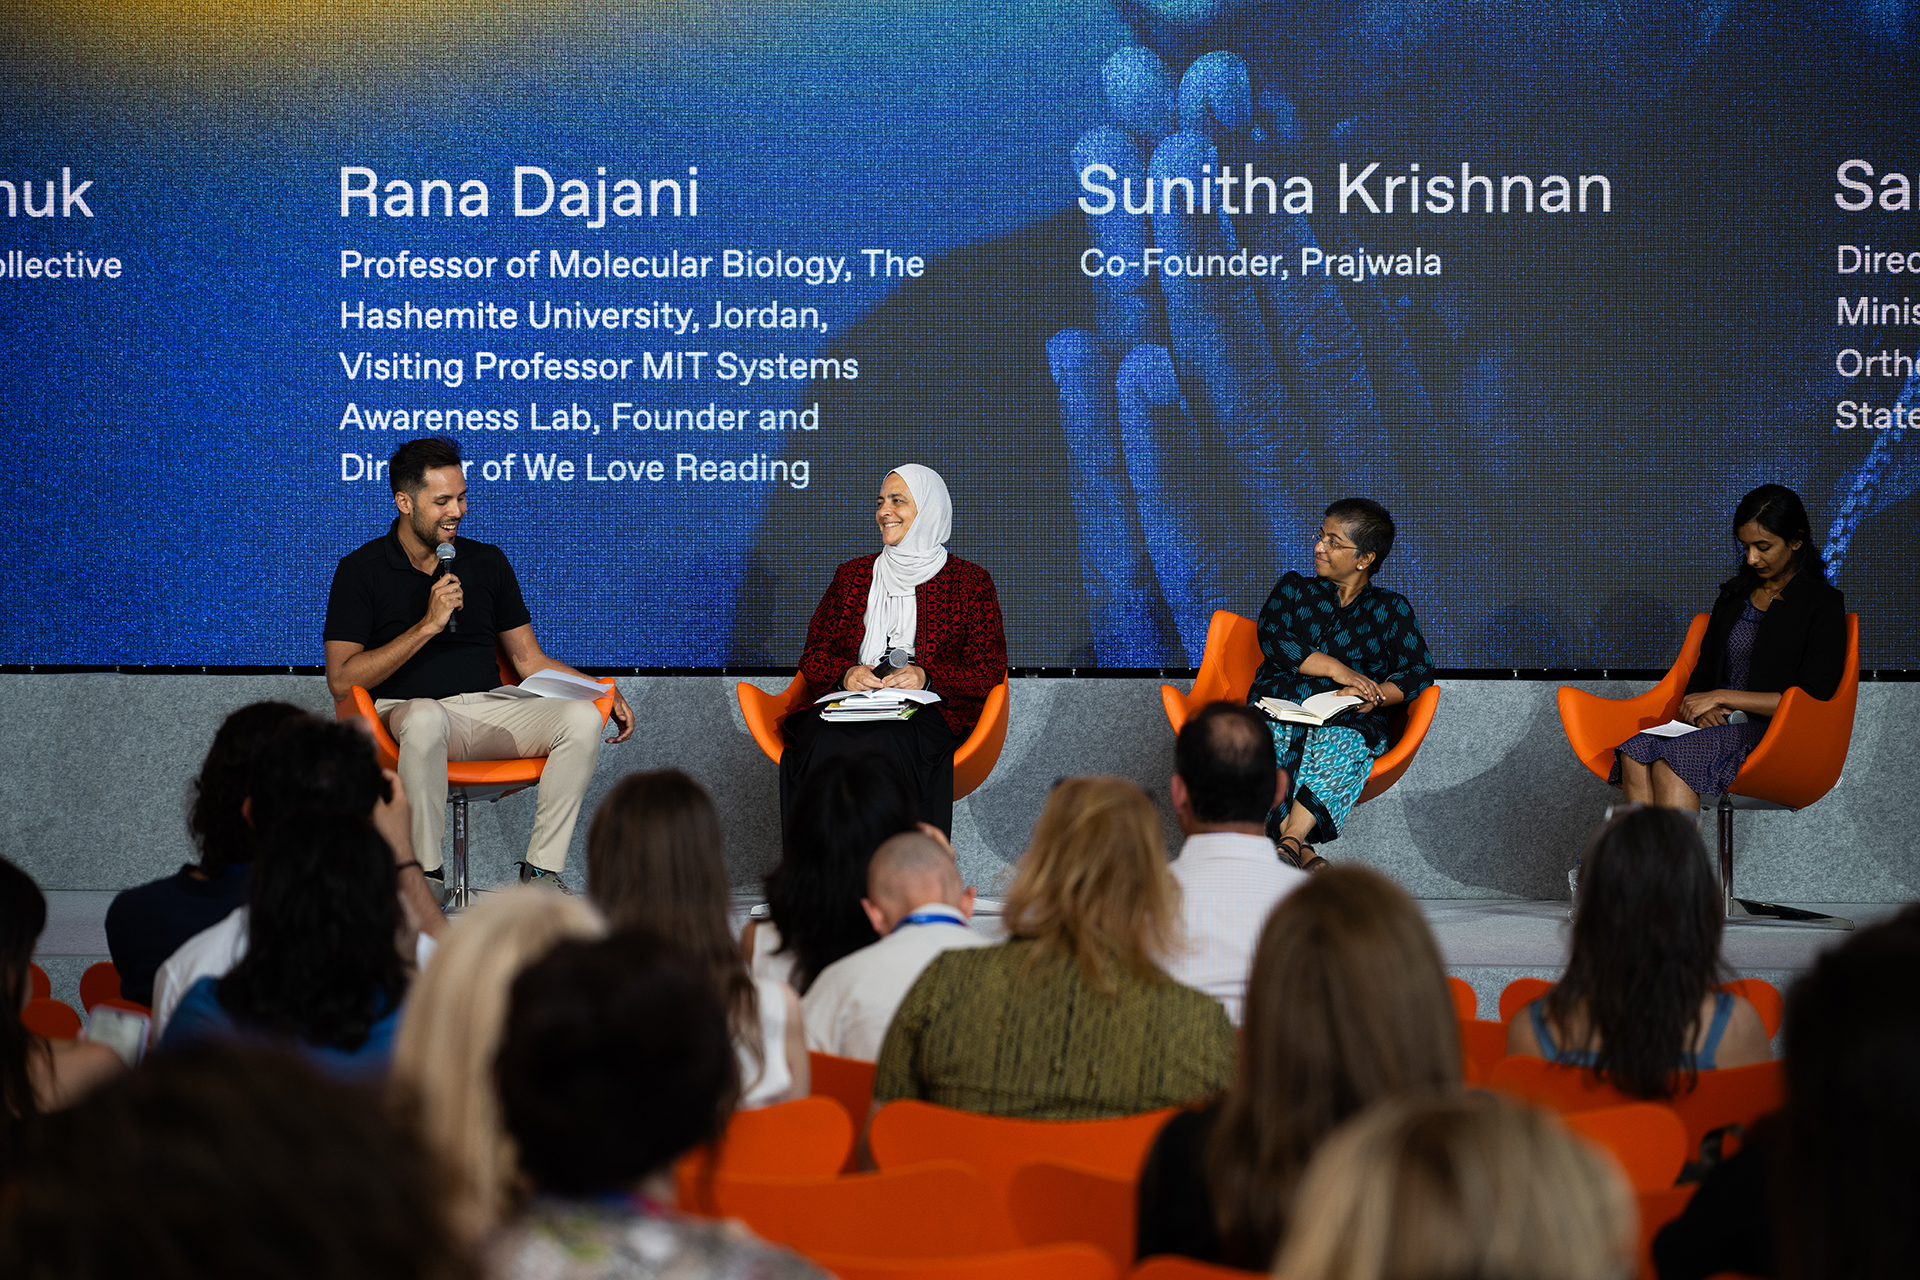 Michael Nikonchuk (left), Rana Dajani, Sunitha Krishnan and Sangeetha Thomas (right) at the Religion, Culture and Mental Health panel. They sit in orange chairs in front of a big screen, while people sit and listen to them. Michael Nikonchuk holds the microphone.